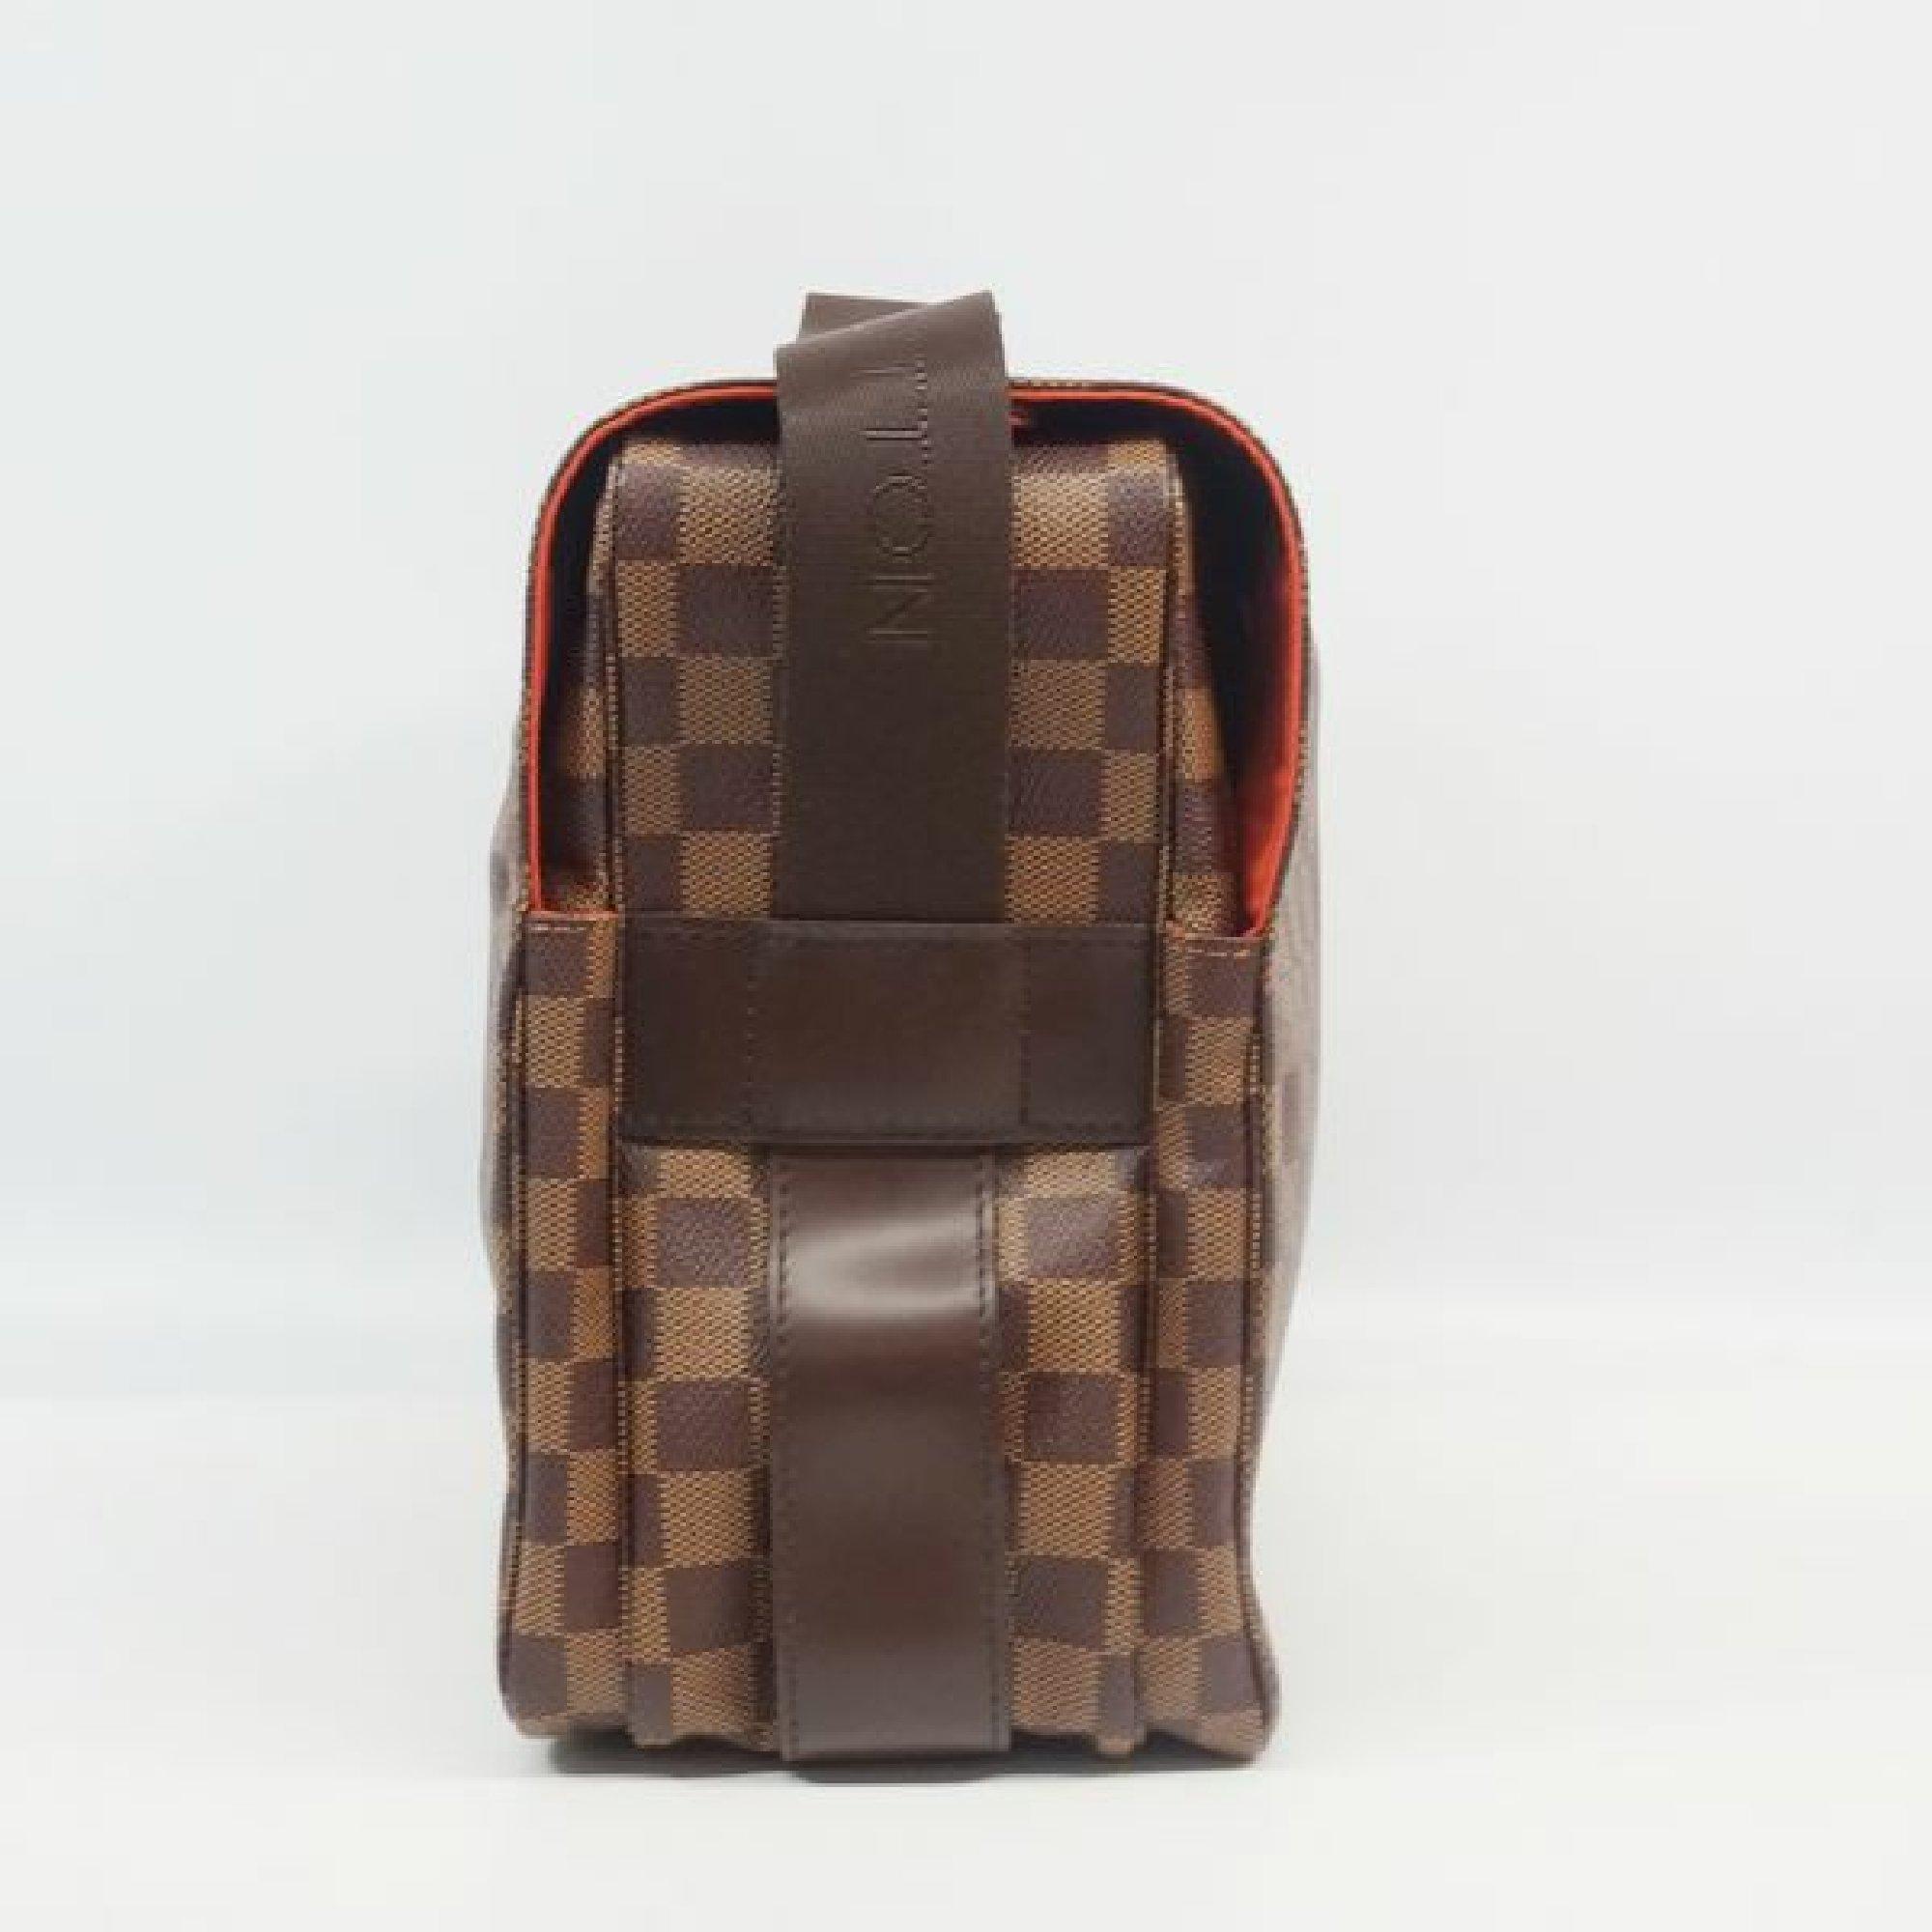 An authentic LOUIS VUITTON Naviglio Womens shoulder bag N45255 Damier ebene. The color is Damier ebene. The outside material is Damier canvas. The pattern is Naviglio. This item is Contemporary. The year of manufacture would be 2005.
Rank
A Good